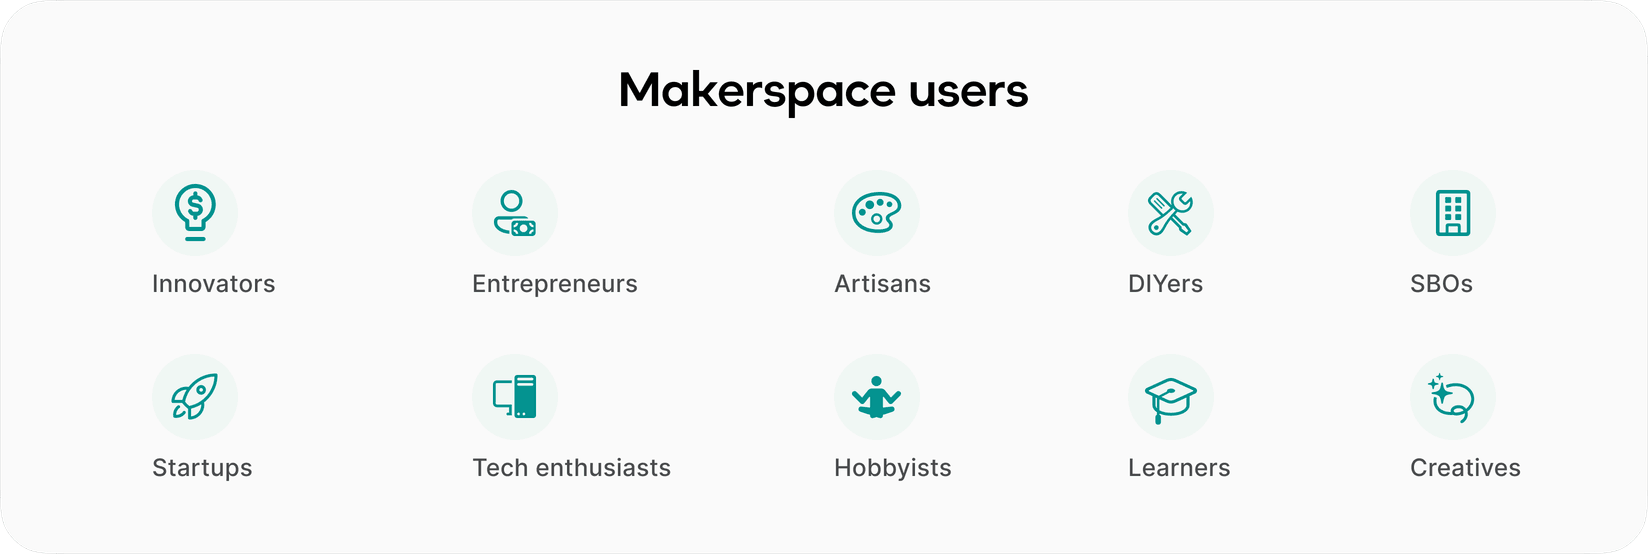 Who are makerspace users